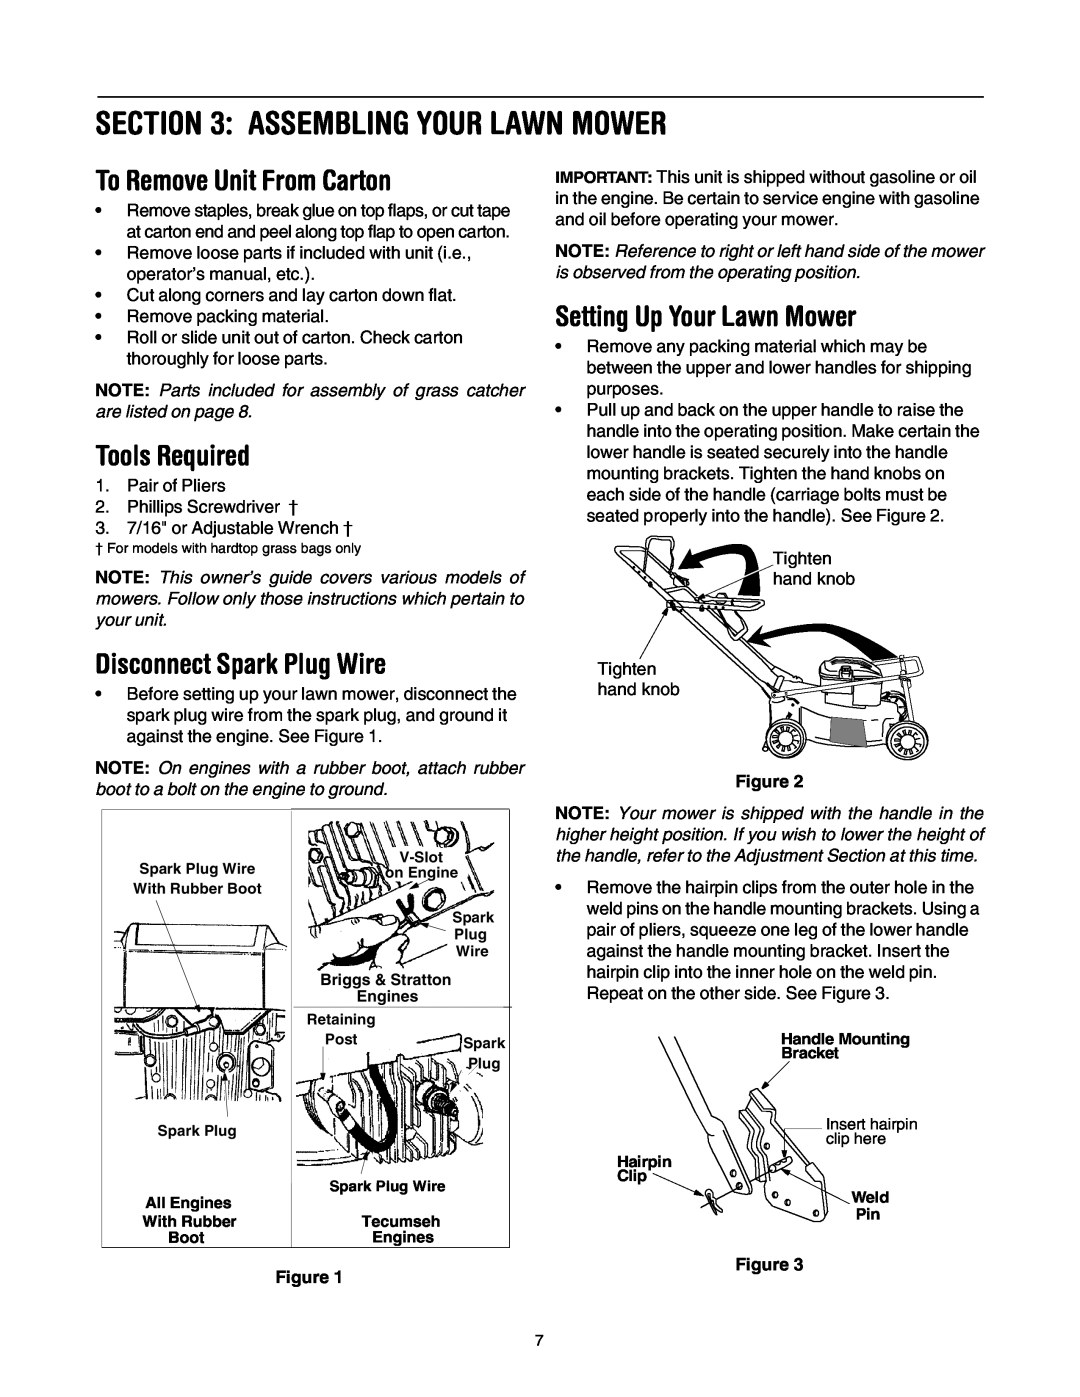 Yard Machines 430 manual Assembling Your Lawn Mower, To Remove Unit From Carton, Tools Required, Disconnect Spark Plug Wire 